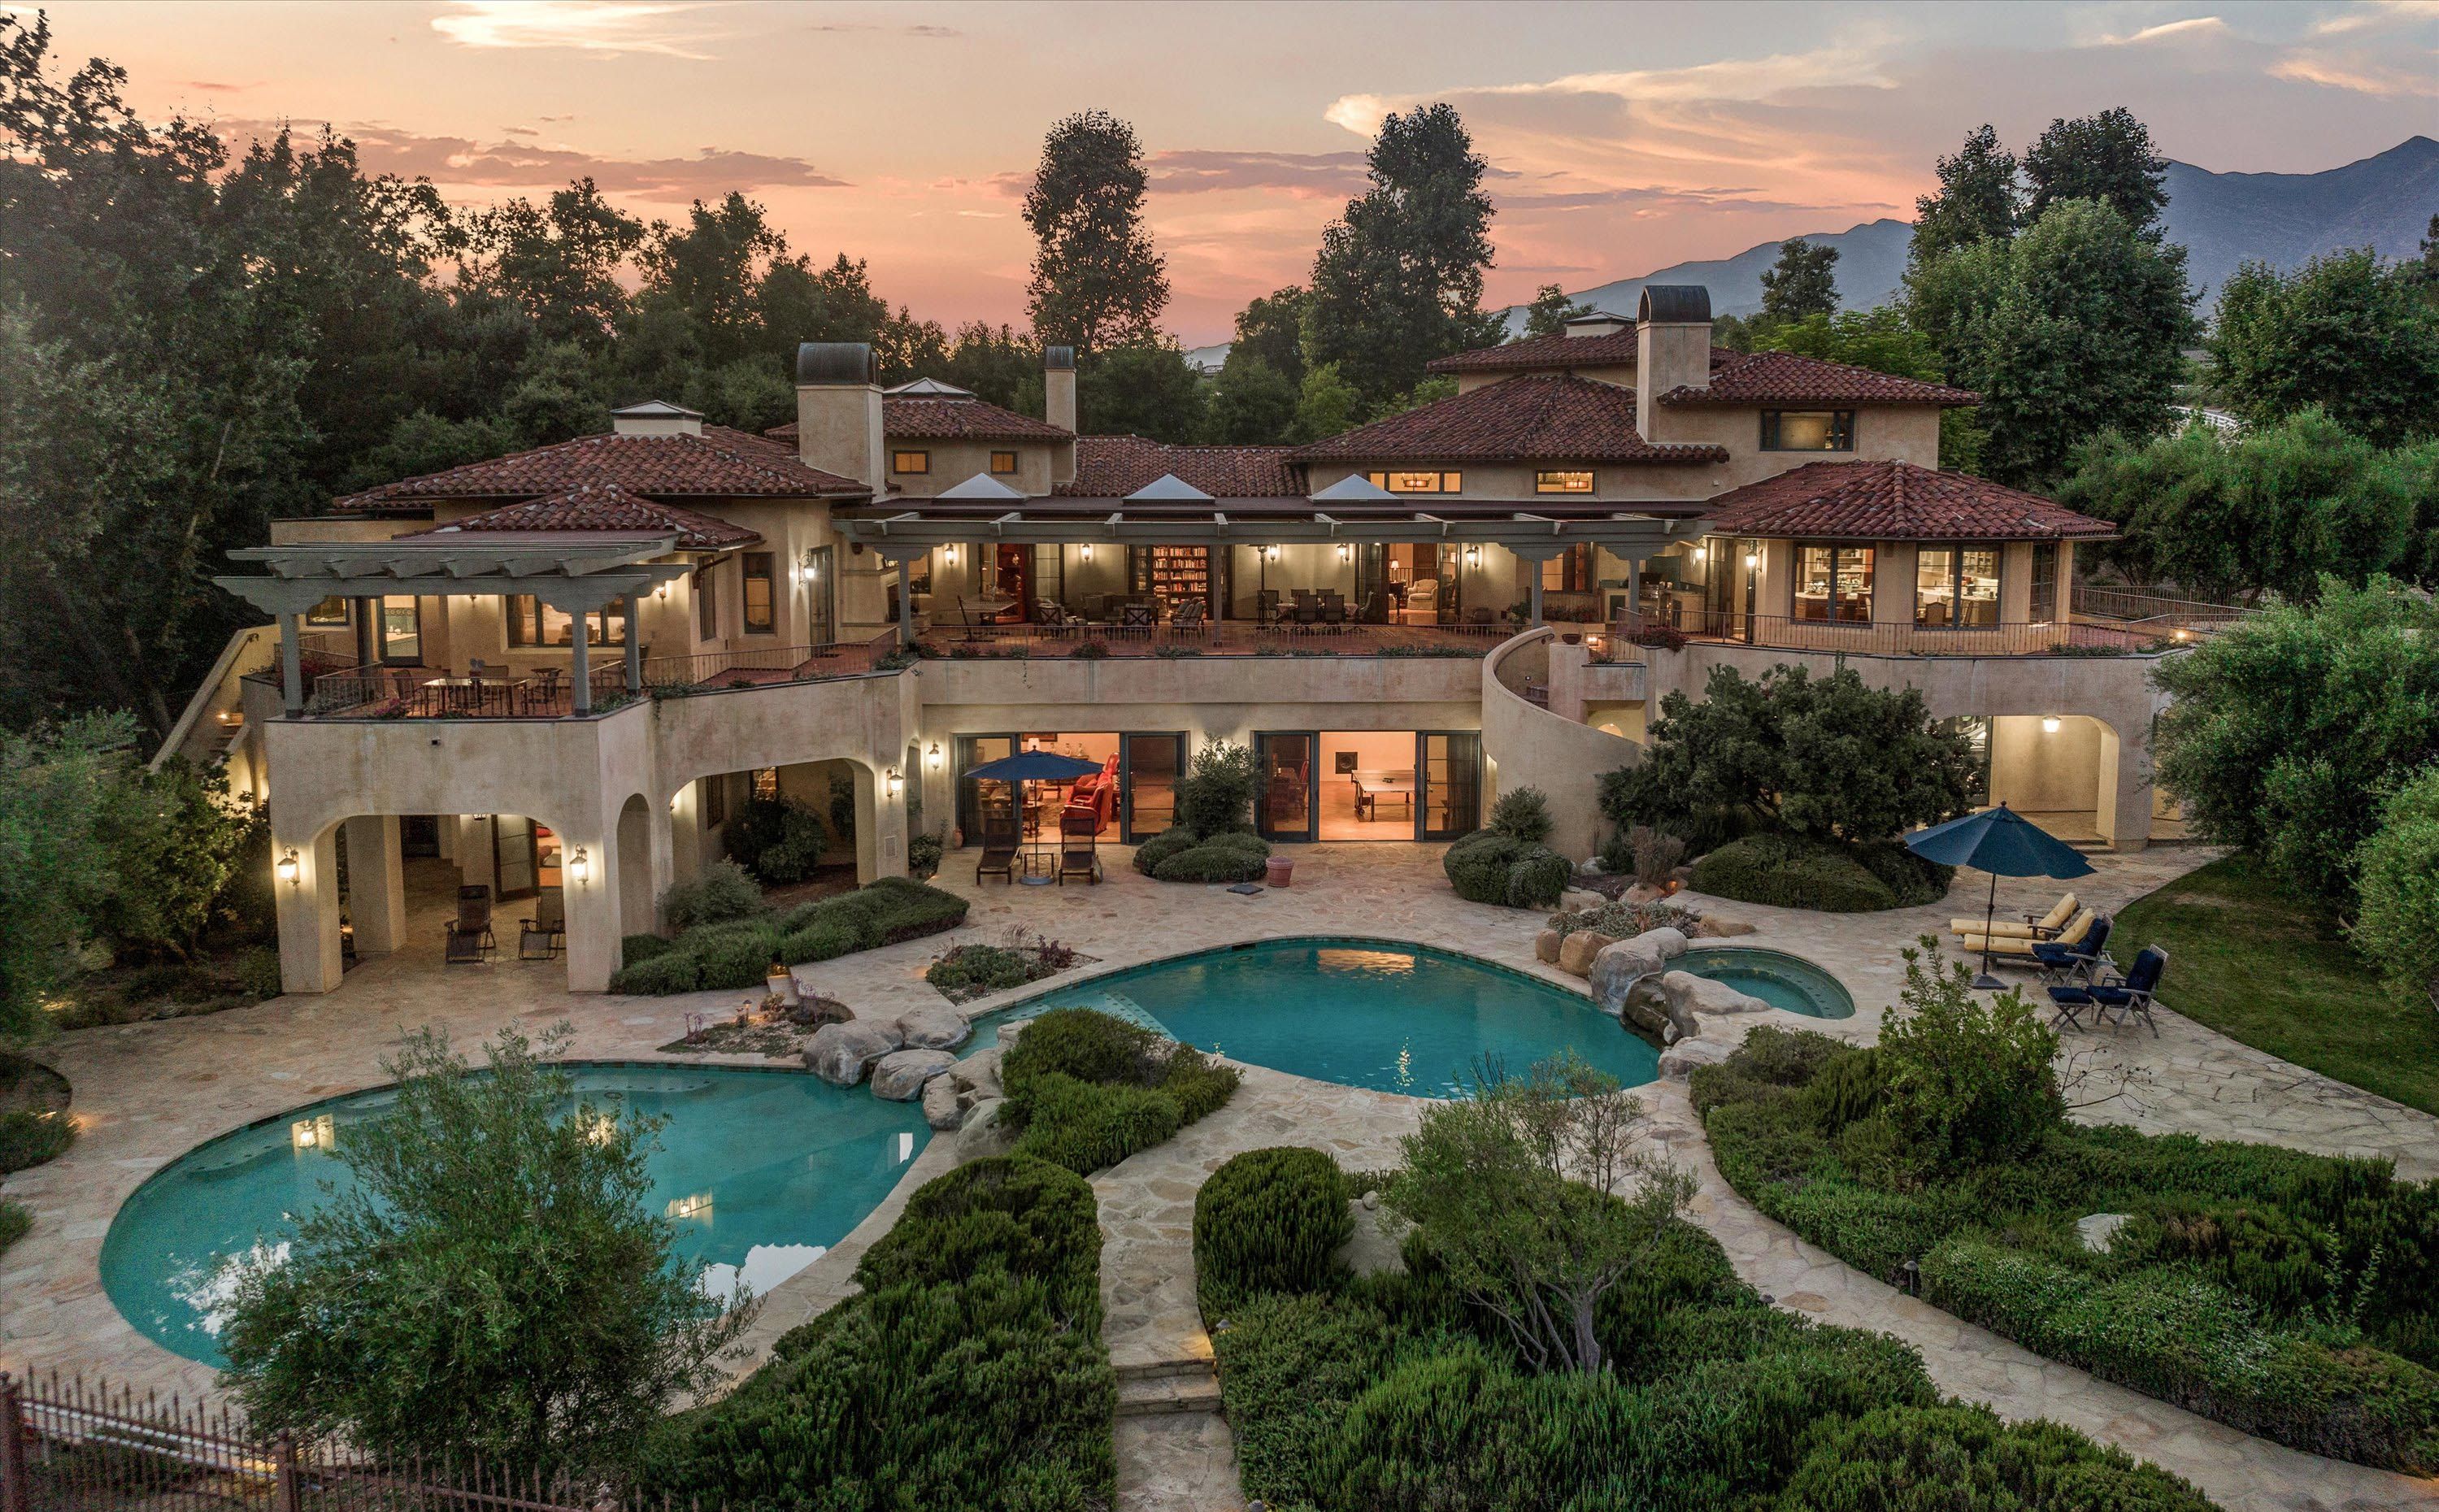 A birds eye view of a luxury home in Ojai at sunset